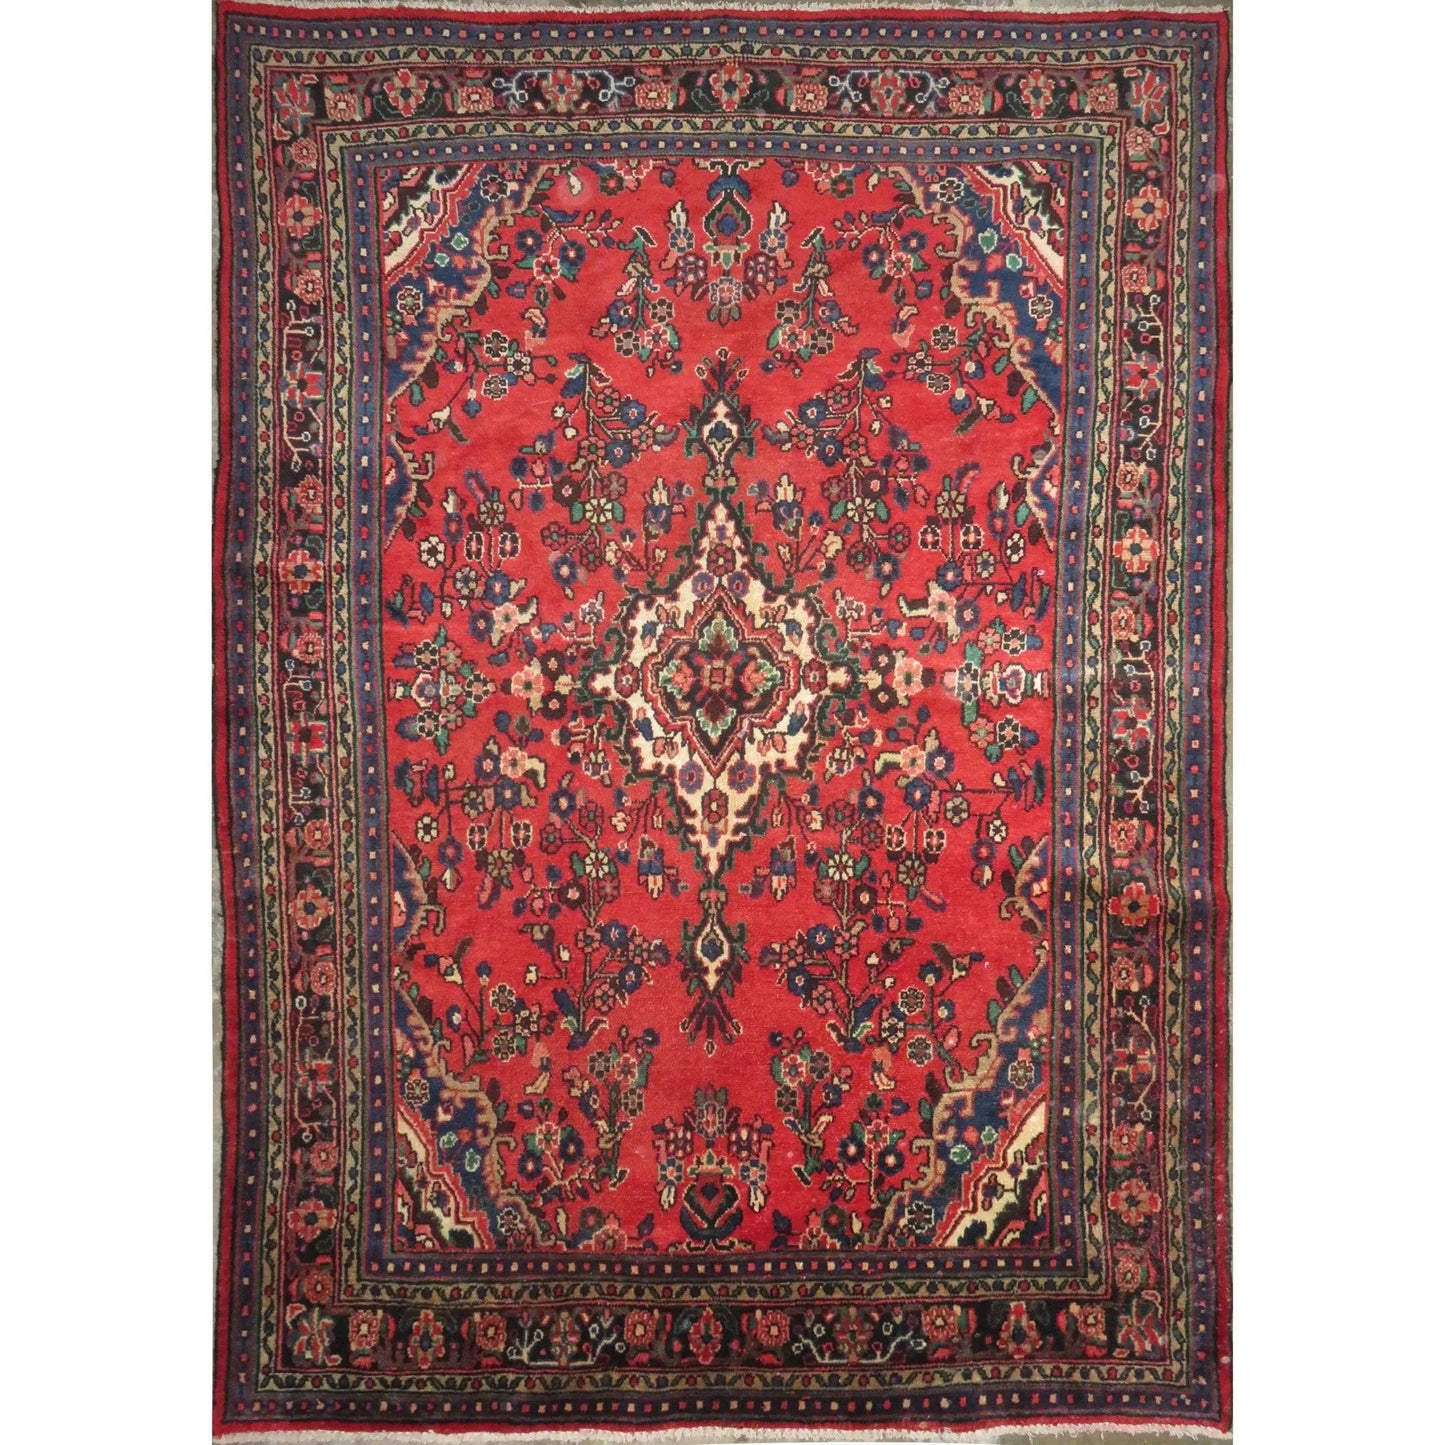 Hand-Knotted Persian Wool Rug _ Luxurious Vintage Design, 10'2" x 6'7", Artisan Crafted